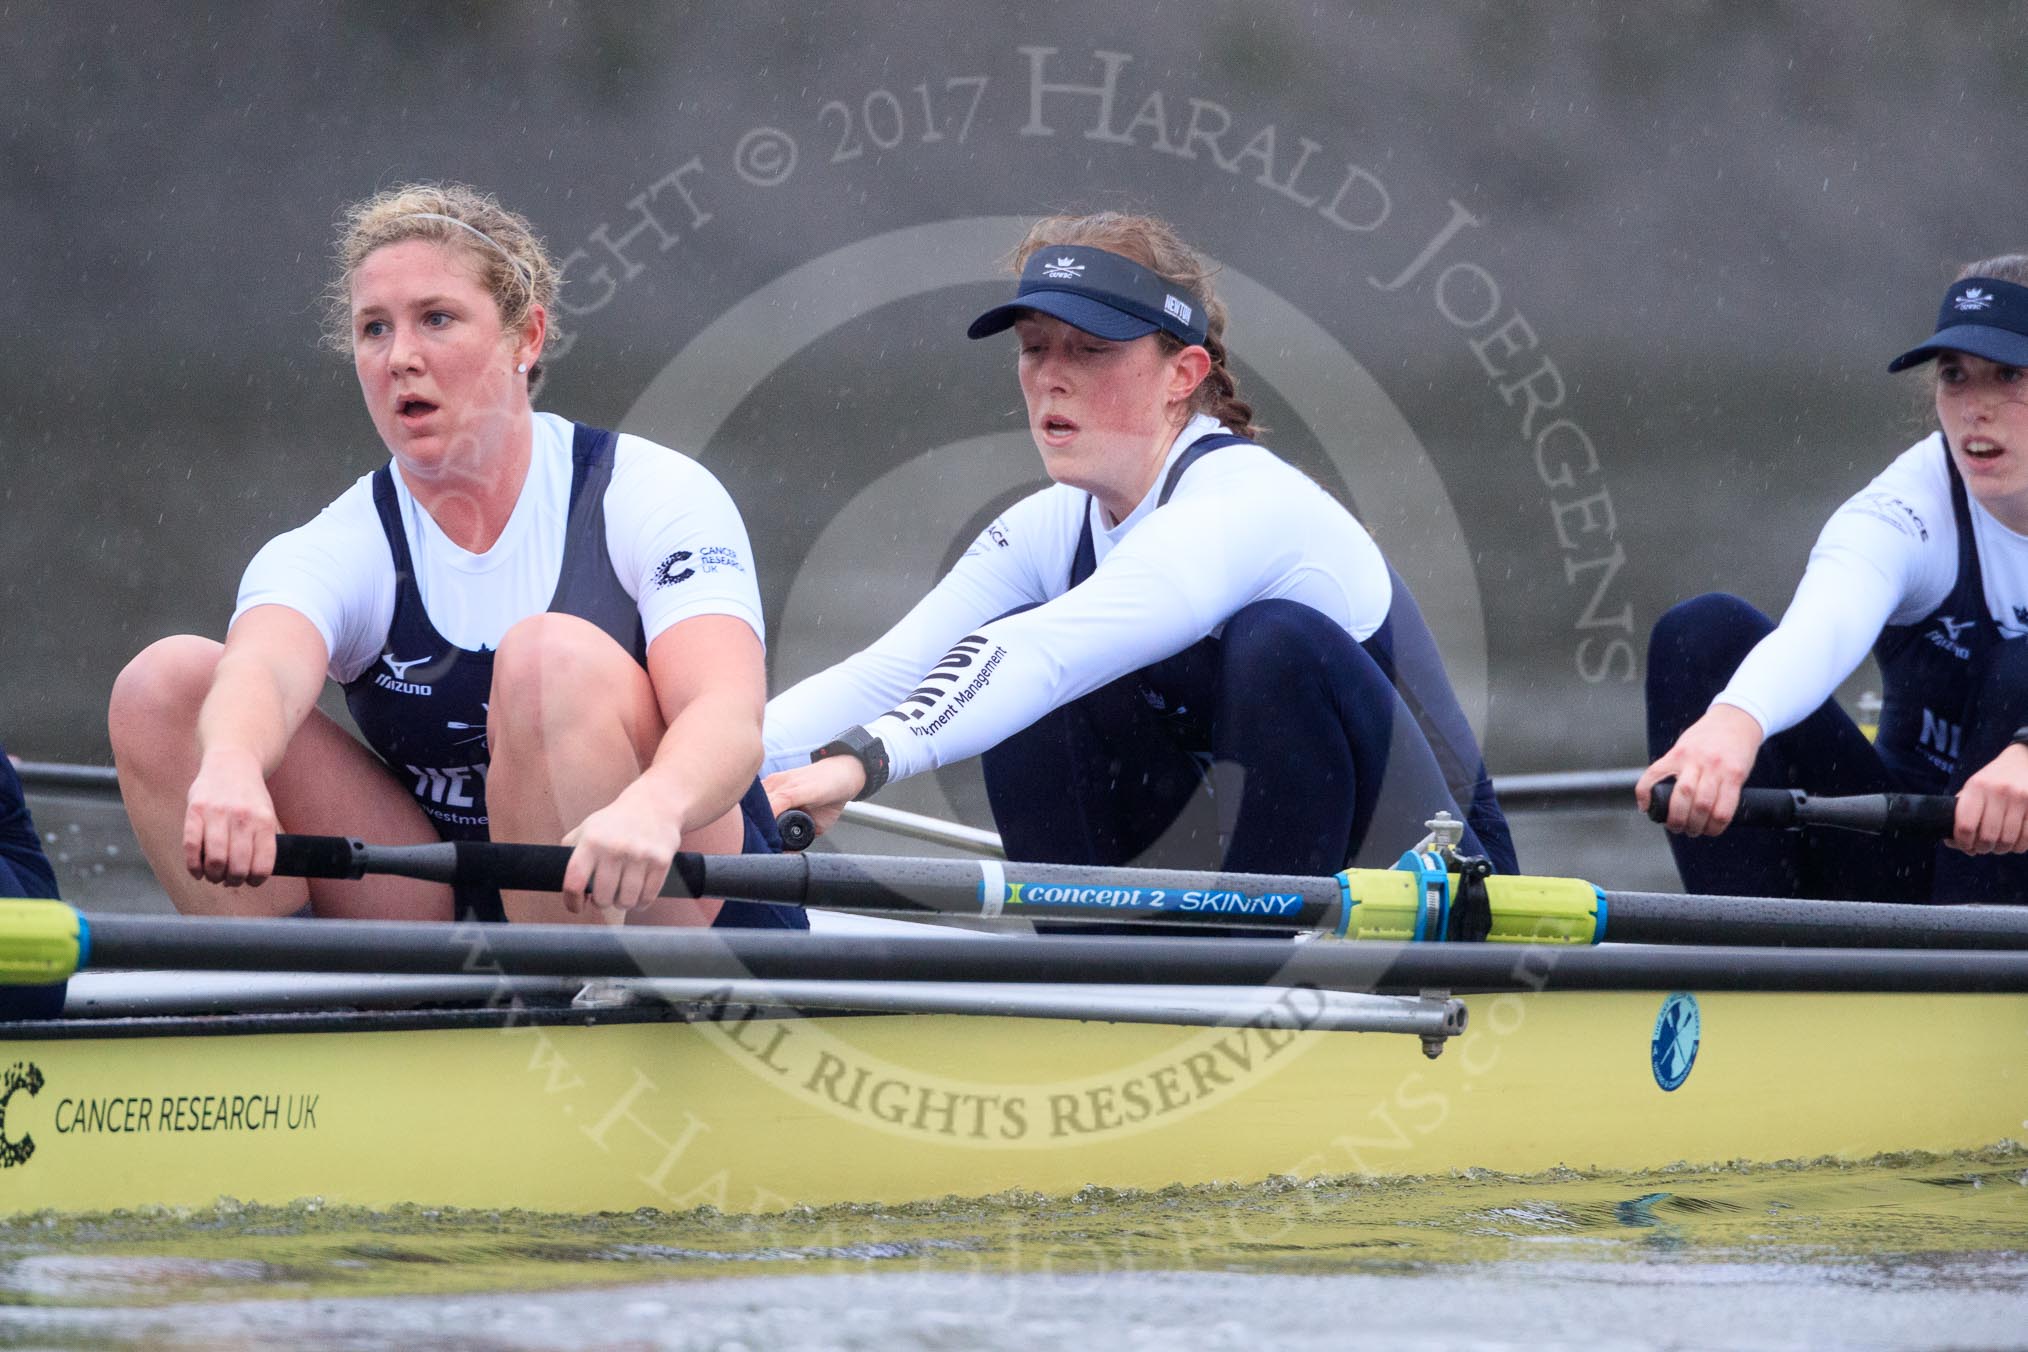 The Boat Race season 2018 - Women's Boat Race Trial Eights (OUWBC, Oxford): "Coursing River" approaching Chiswick Pier - 5 Morgan McGovern, 4 Anna Murgatroyd, 3 Stefanie Zekoll.
River Thames between Putney Bridge and Mortlake,
London SW15,

United Kingdom,
on 21 January 2018 at 14:39, image #140